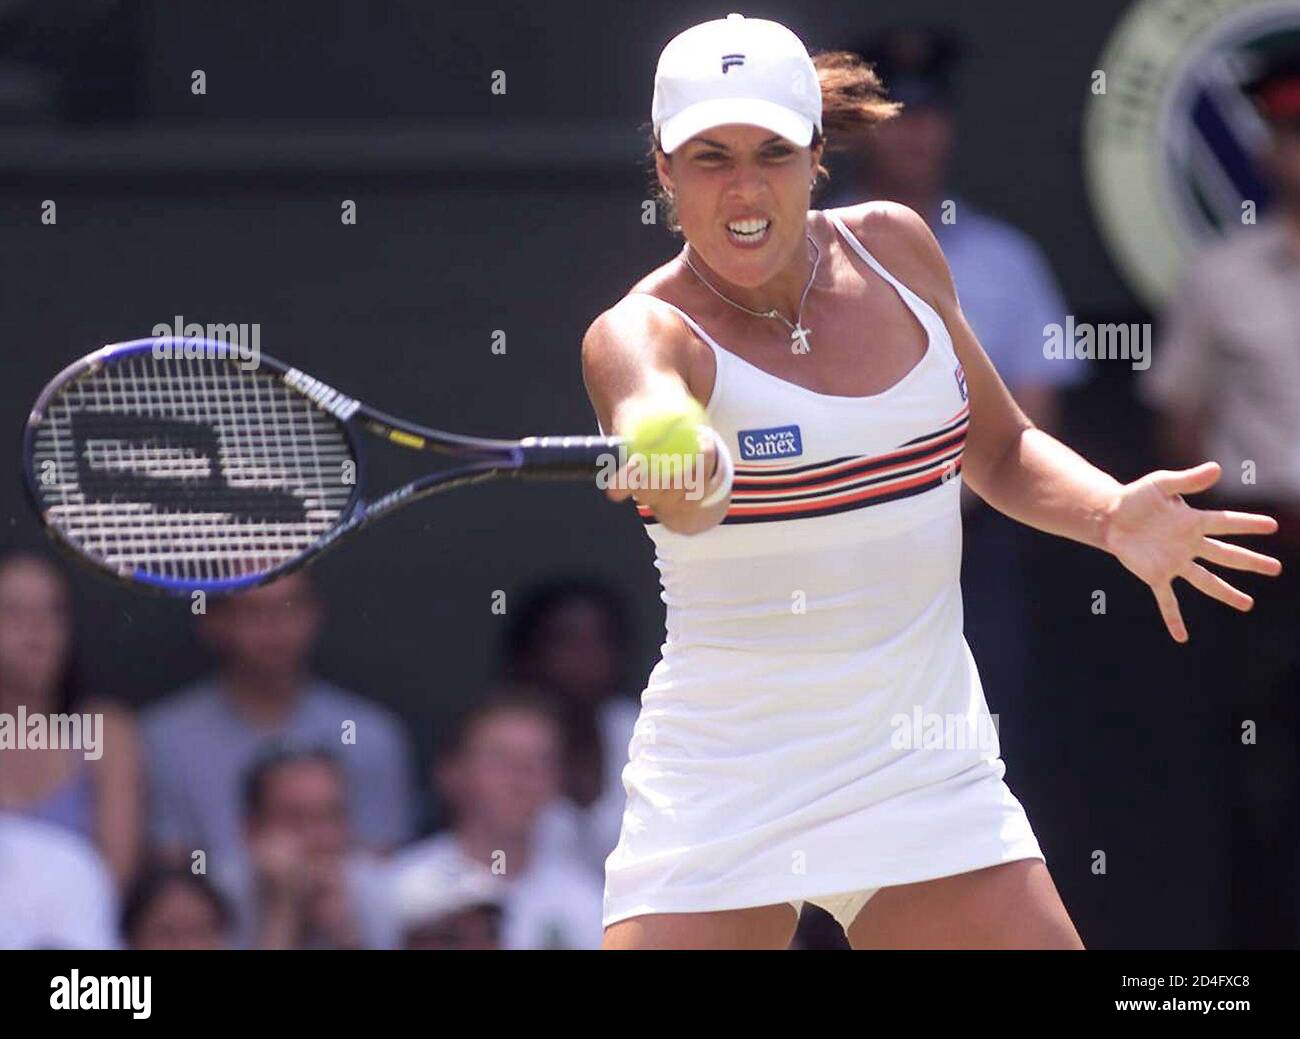 Jennifer Capriati of the U.S. plays a return to compatriot Serena Williams  during their women's quarter finals match at the Wimbledon Championships  July 3, 2001. PS/GB Stock Photo - Alamy